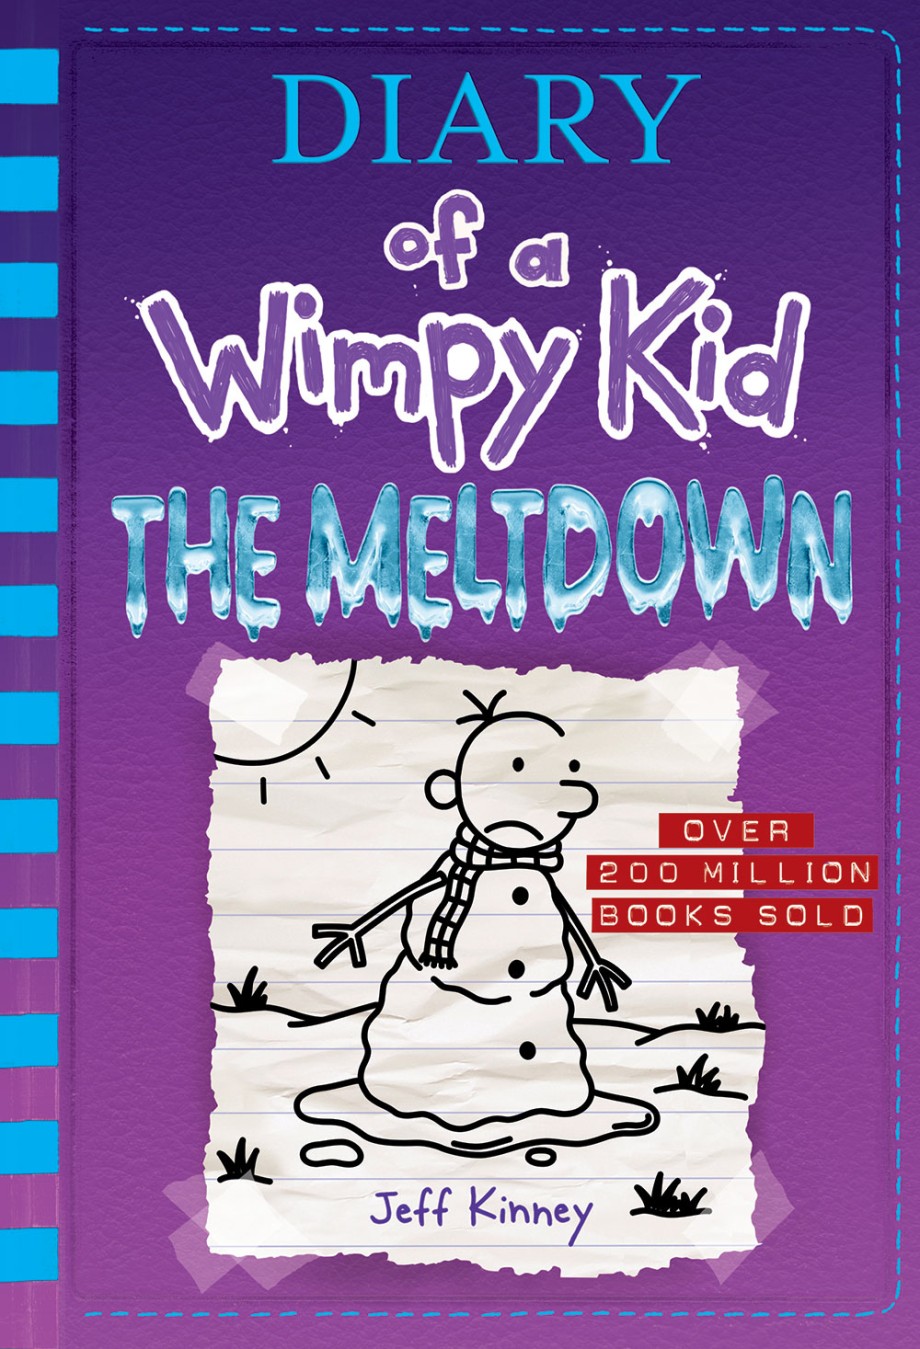 Meltdown (Diary of a Wimpy Kid Book 13) 